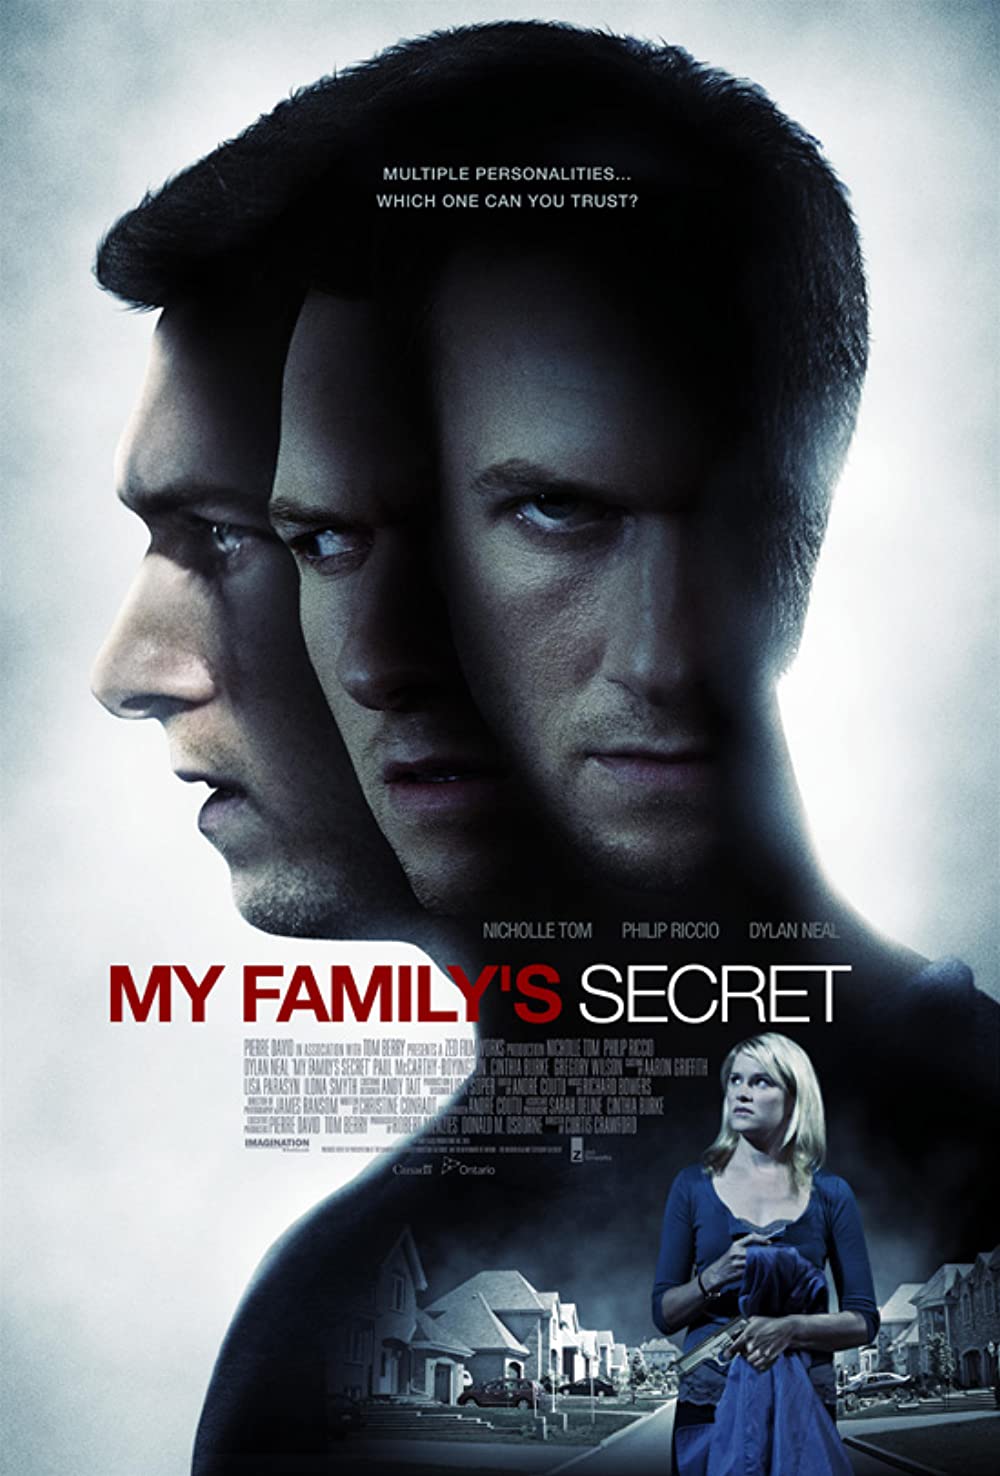 My Family's Secret Movie Download - My Family's Secret Review